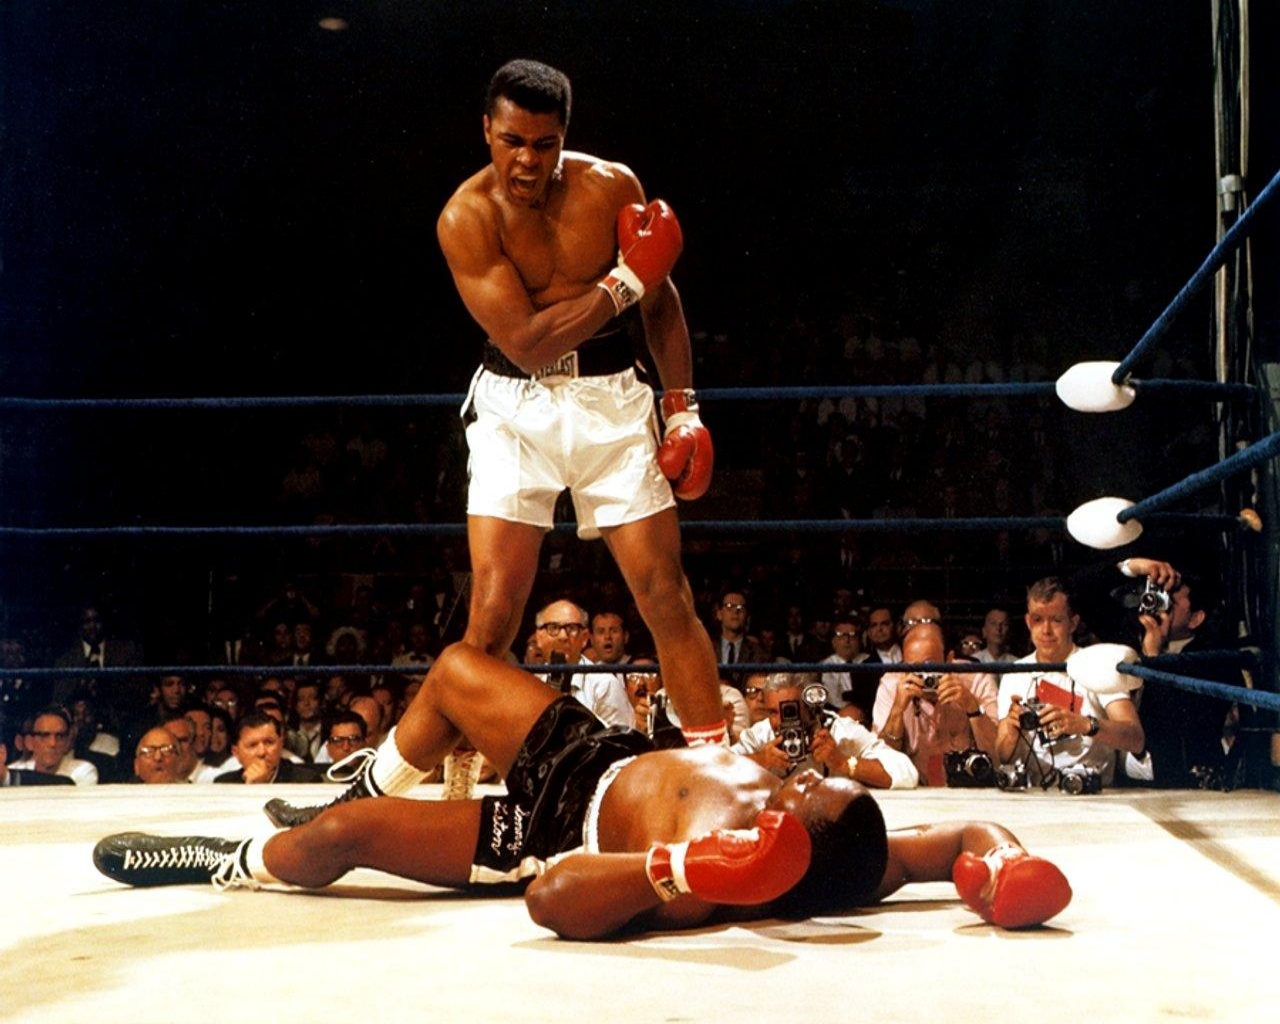 Pin Muhammad Ali Wallpaper Celebrity And Movie Pictures Photos On